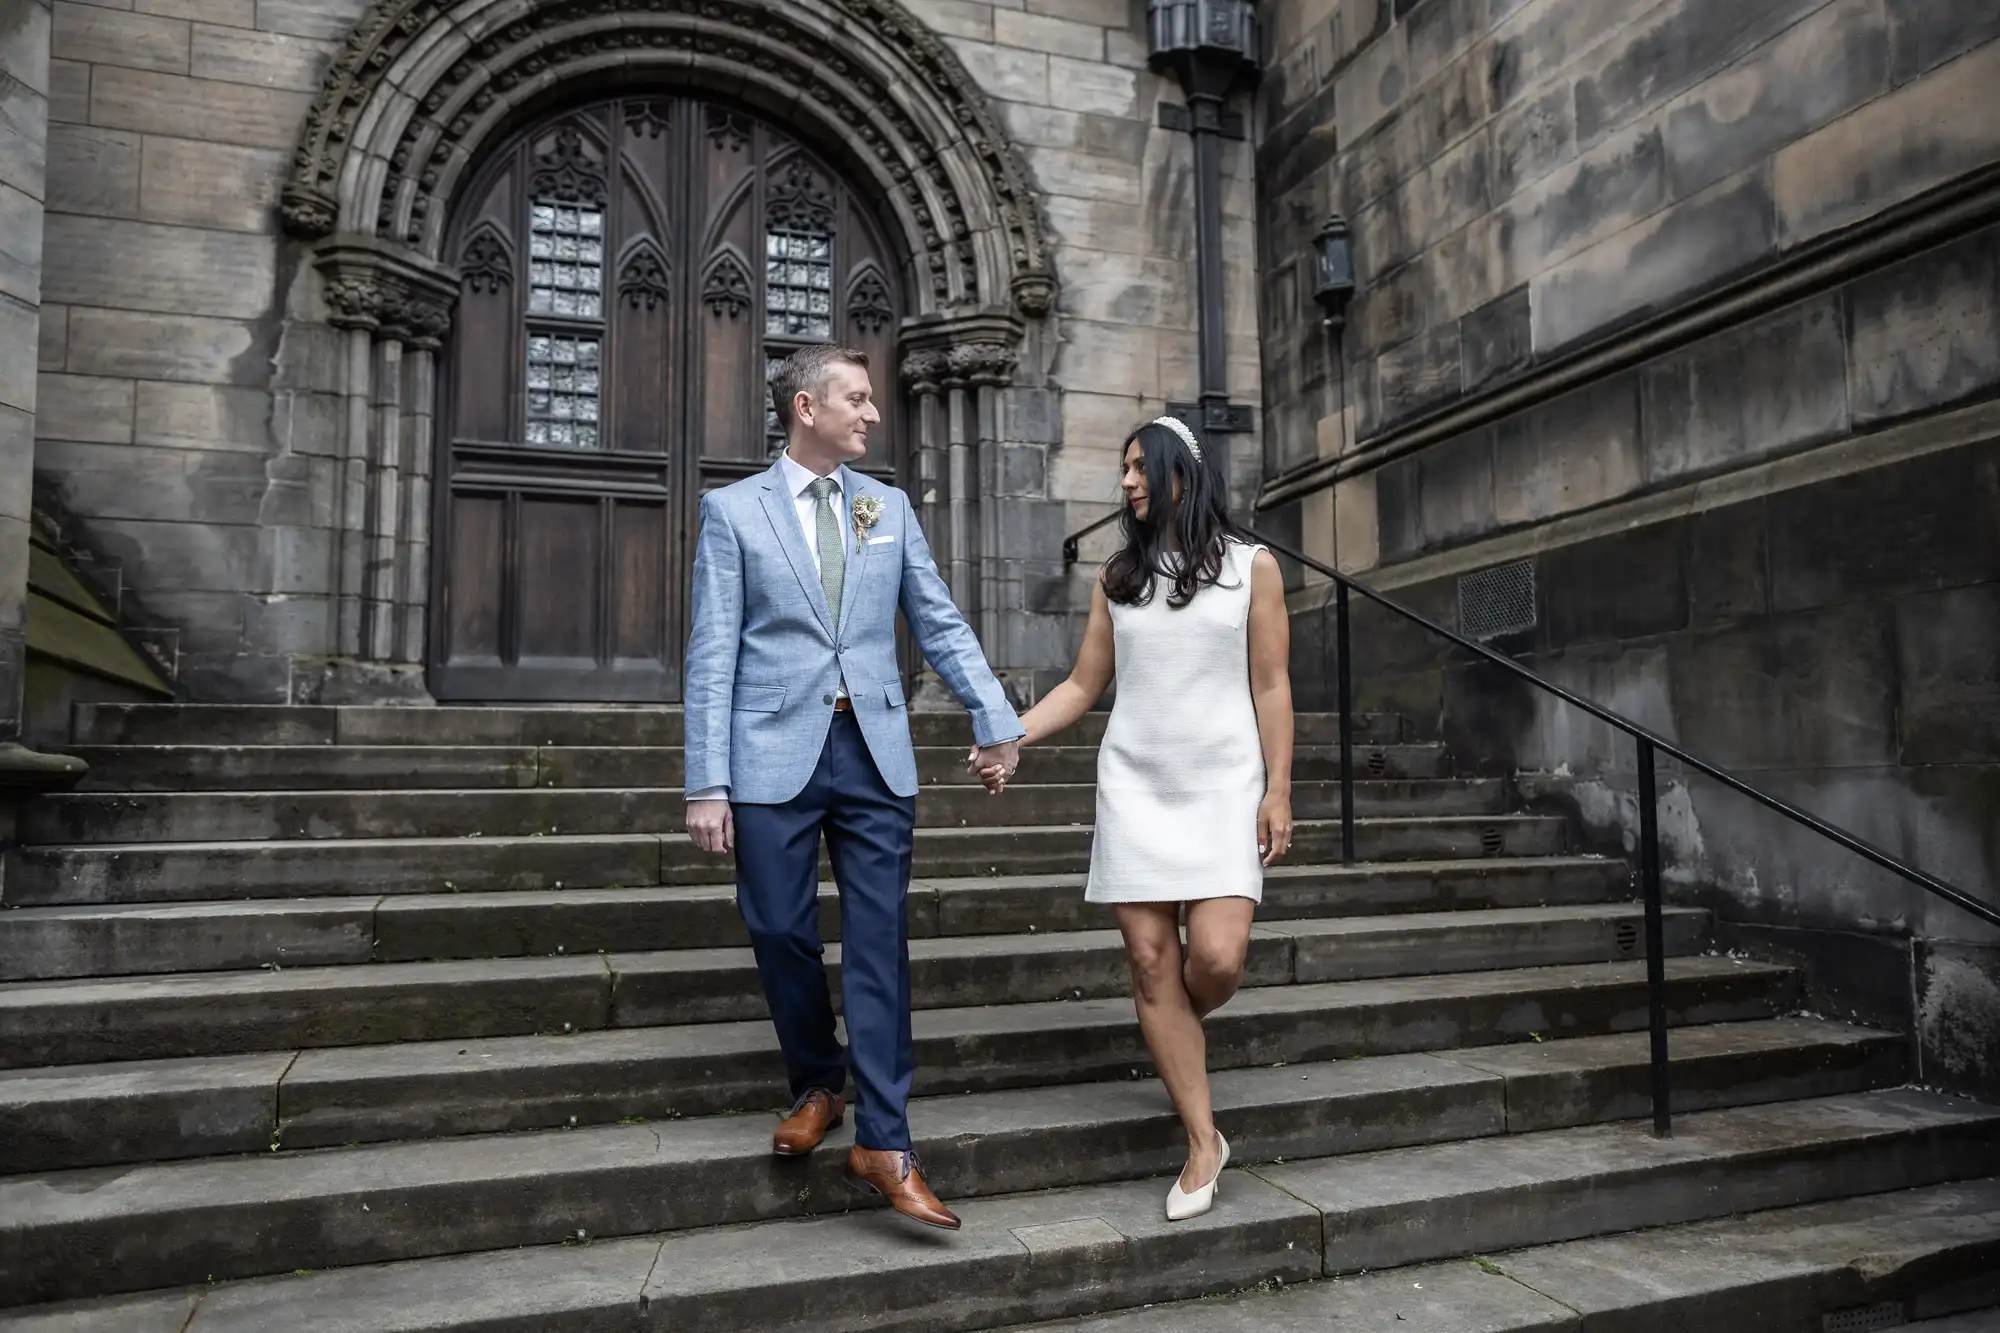 A couple, dressed formally, walks hand in hand down stone stairs outside a historic building with arched wooden doors.